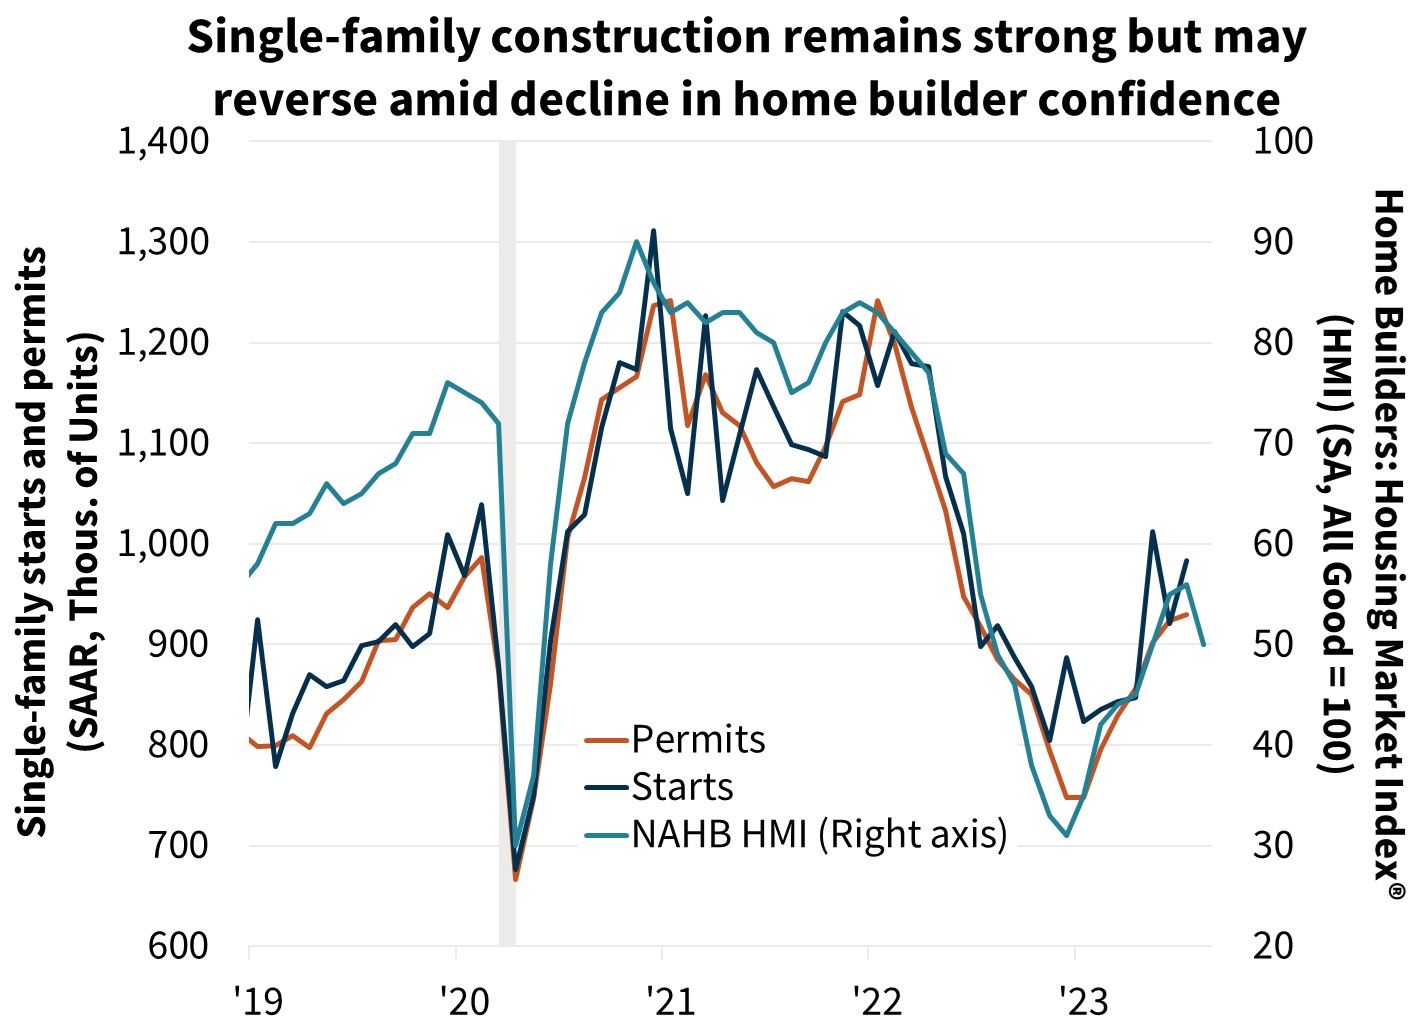  Single-family construction remains strong but may reverse amid decline in homebuilder confidence
